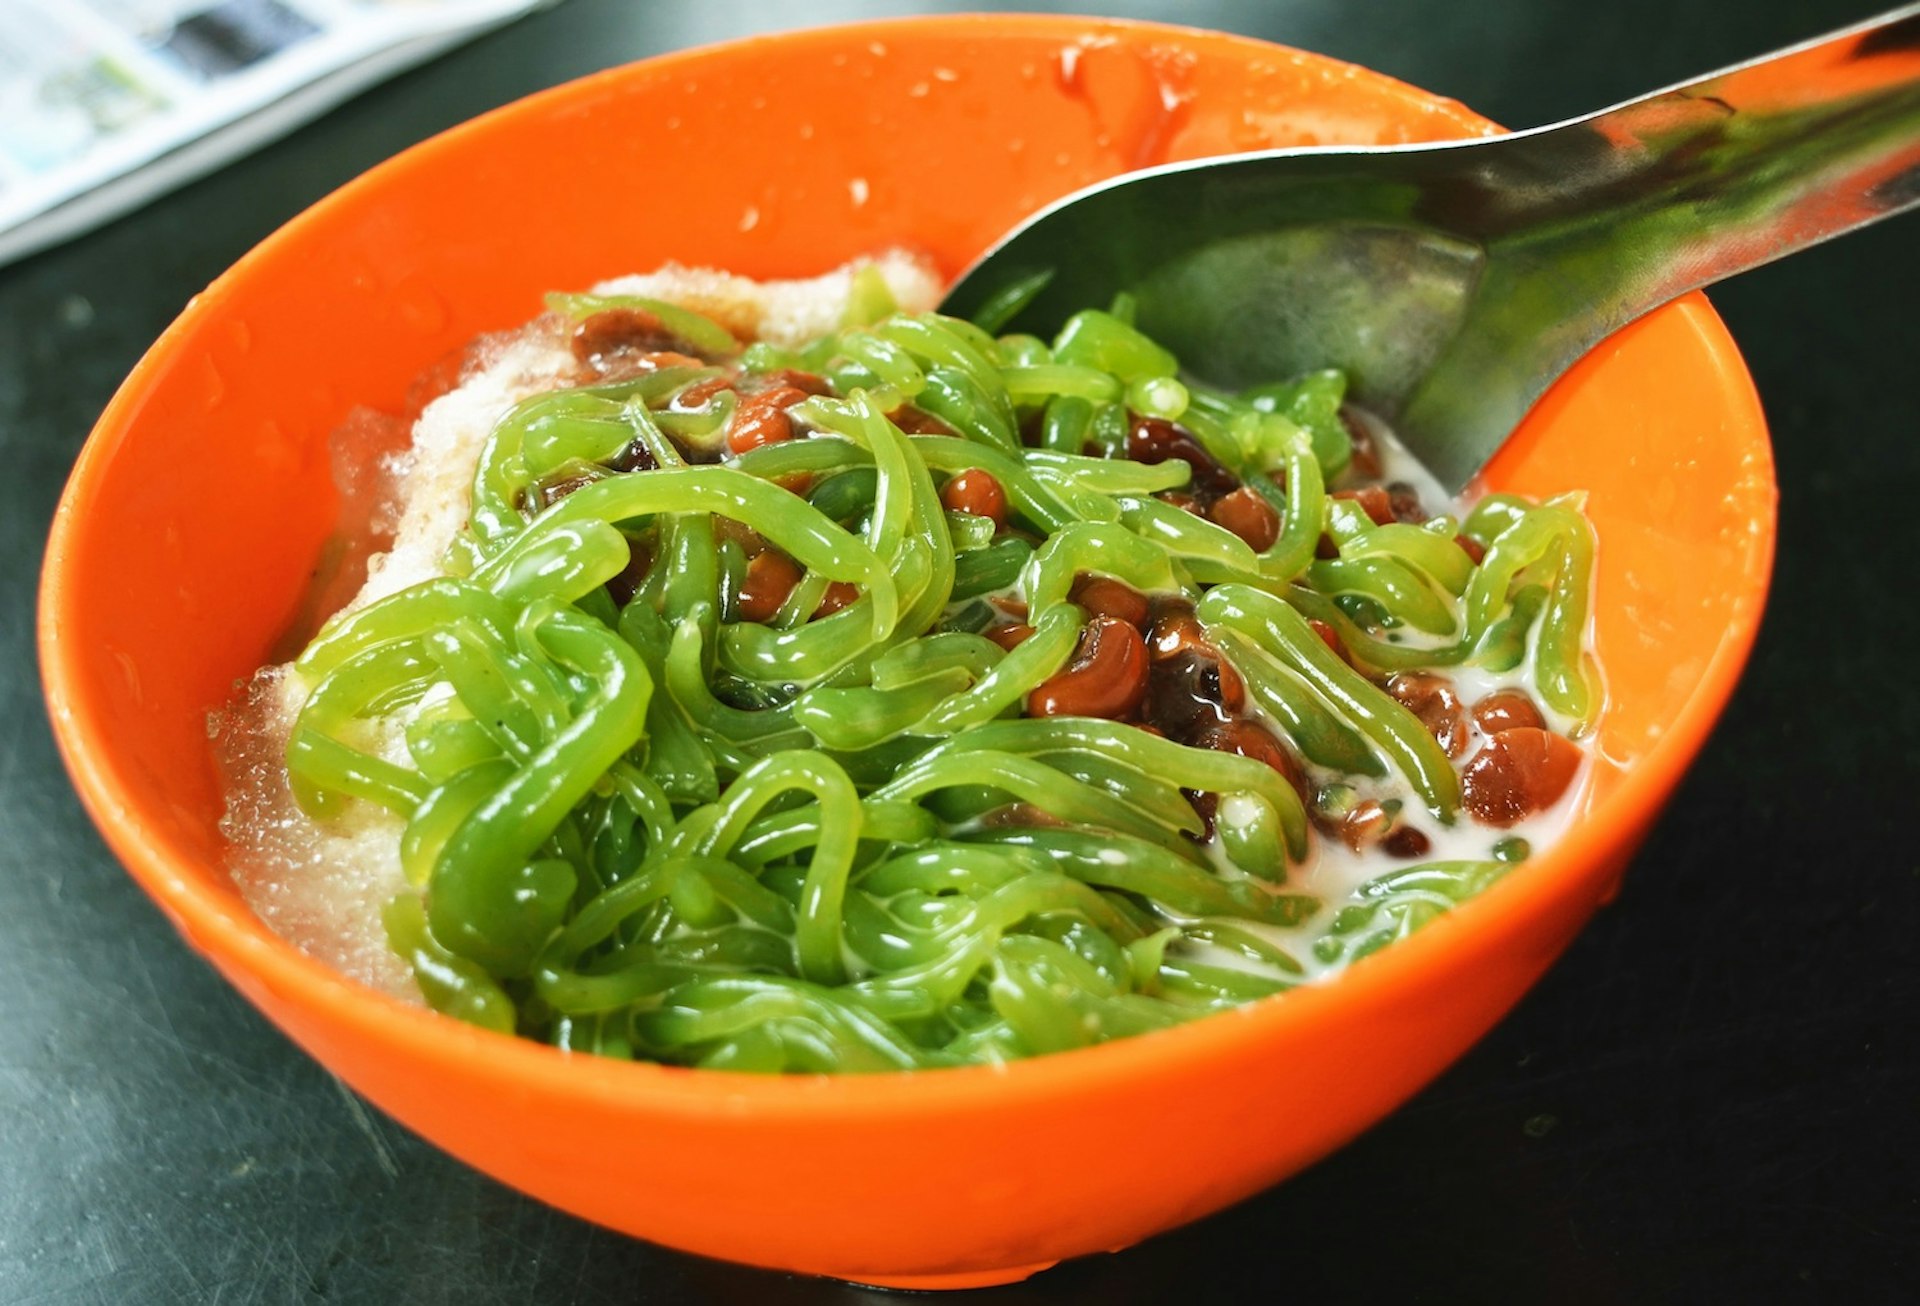 Cendol, guaranteed to deliver a sugar high © Memindshot / Getty Images